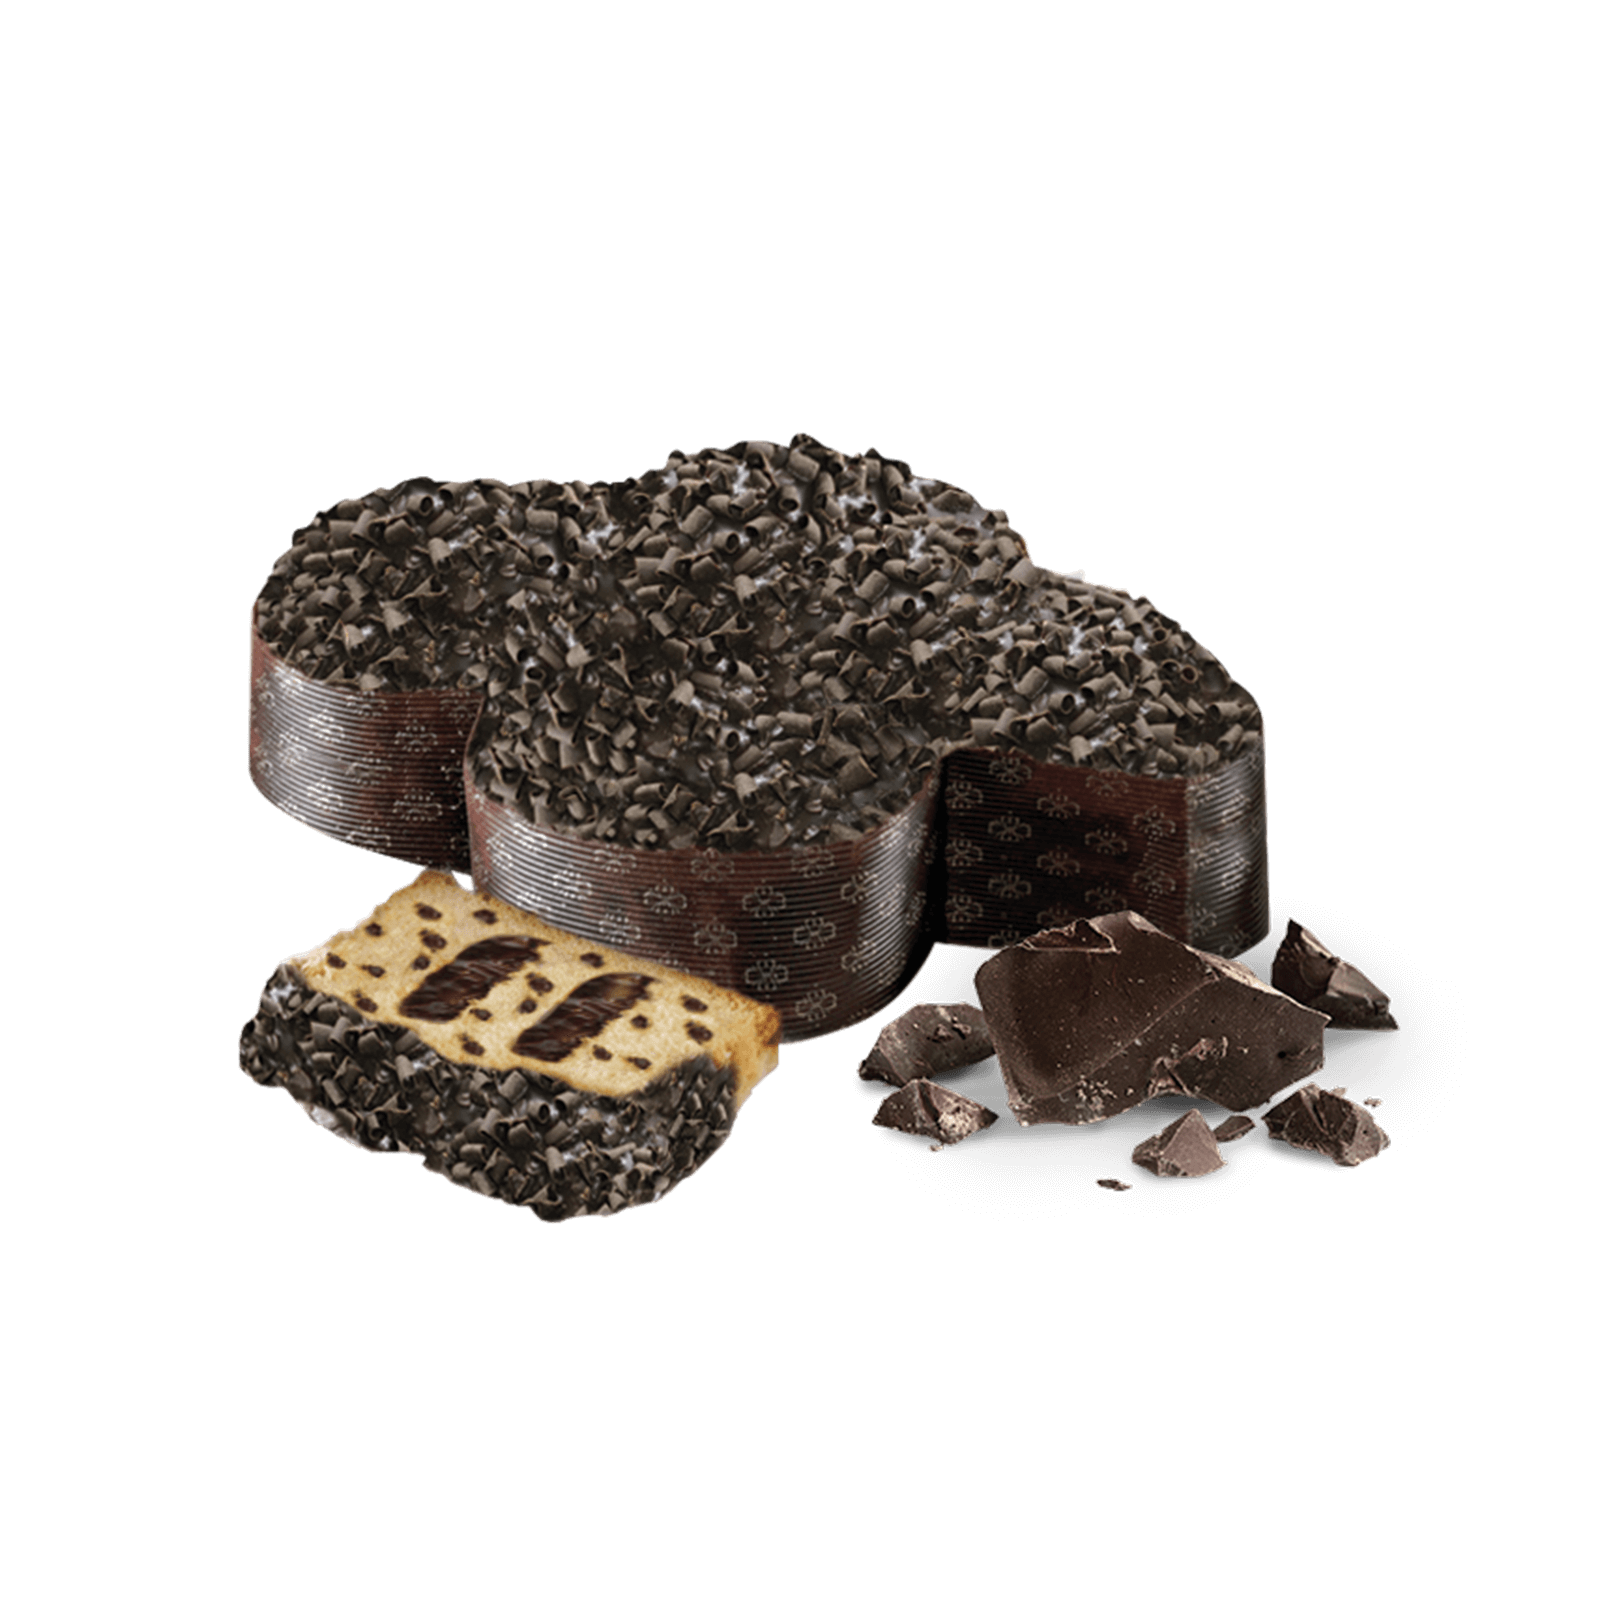 Colomba Regal Chocolate – 1kg